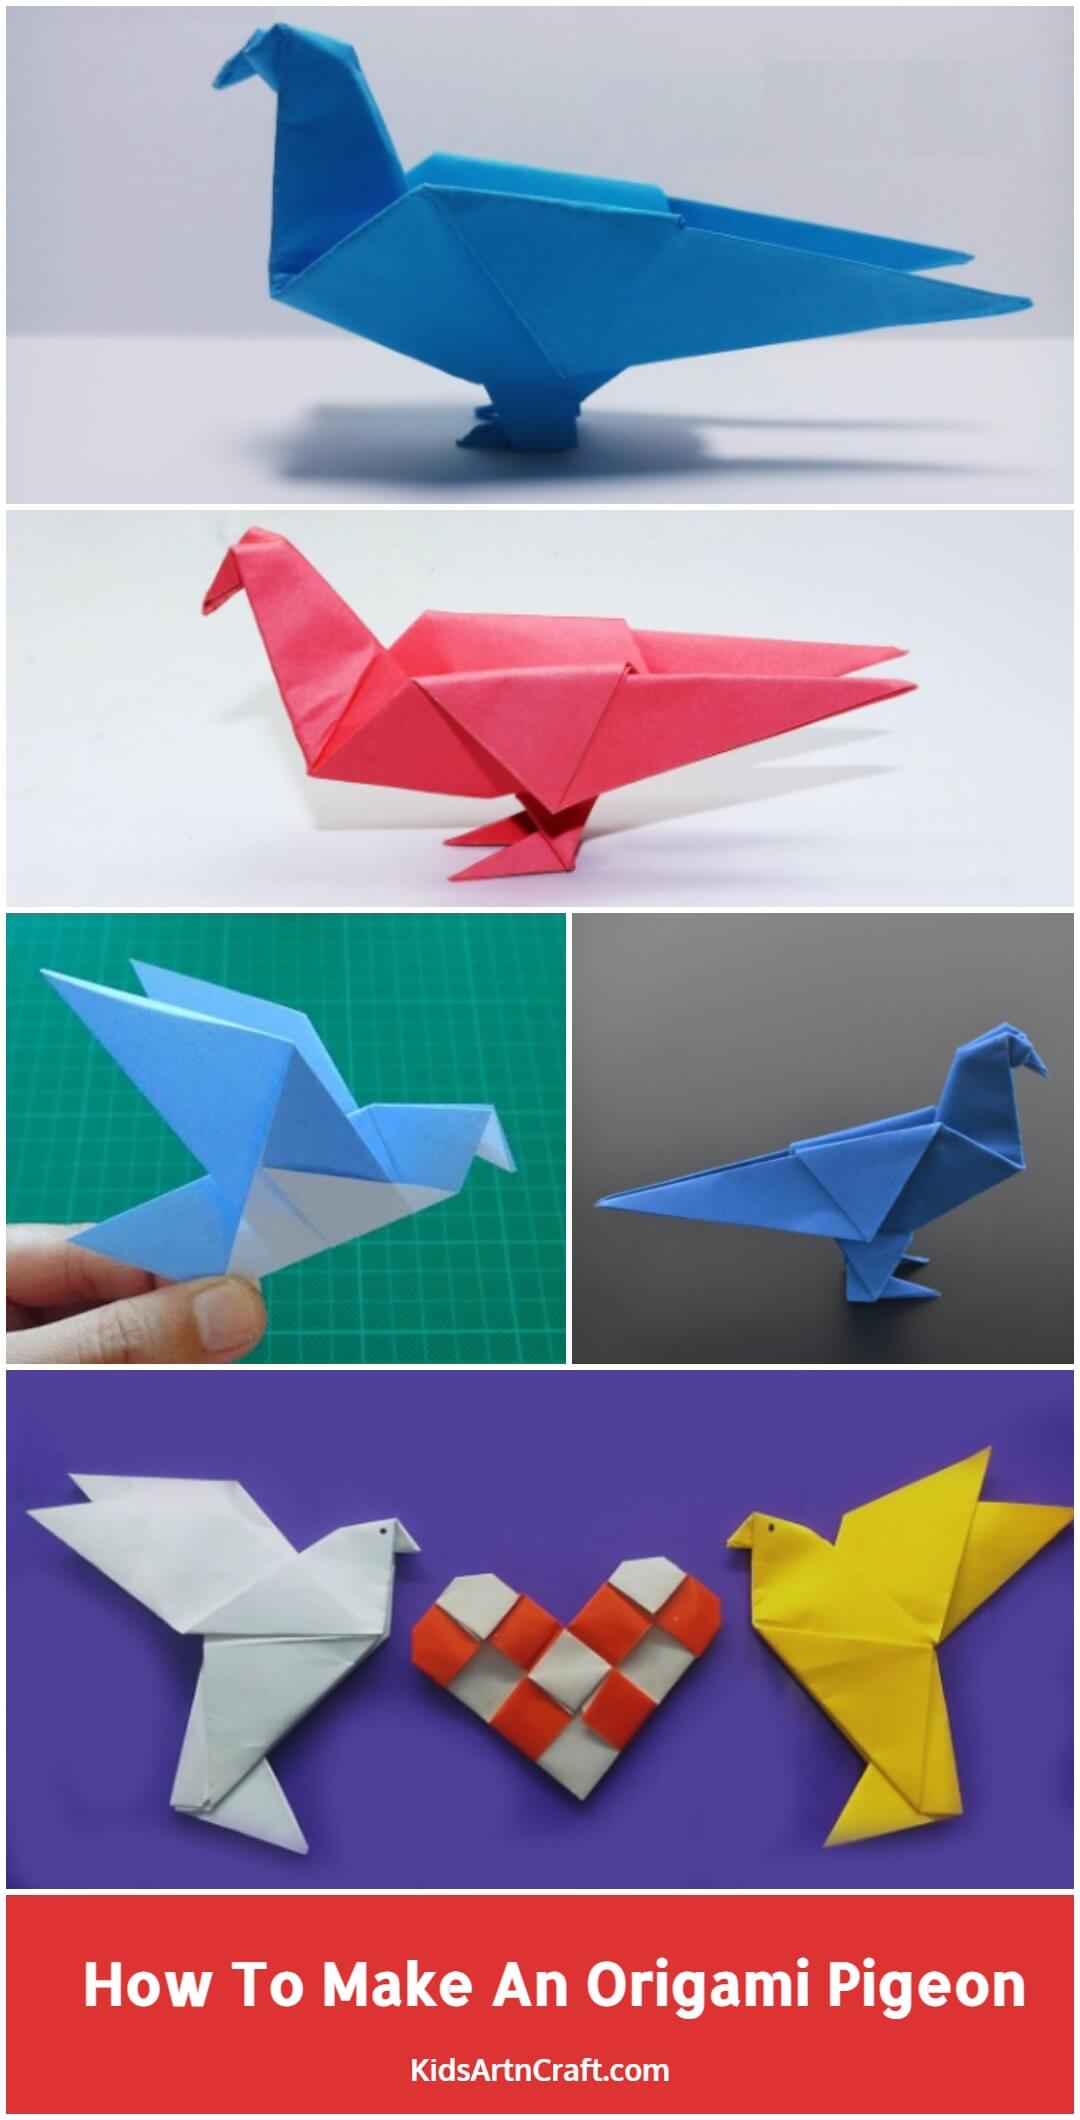 How To Make An Origami Pigeon With Kids